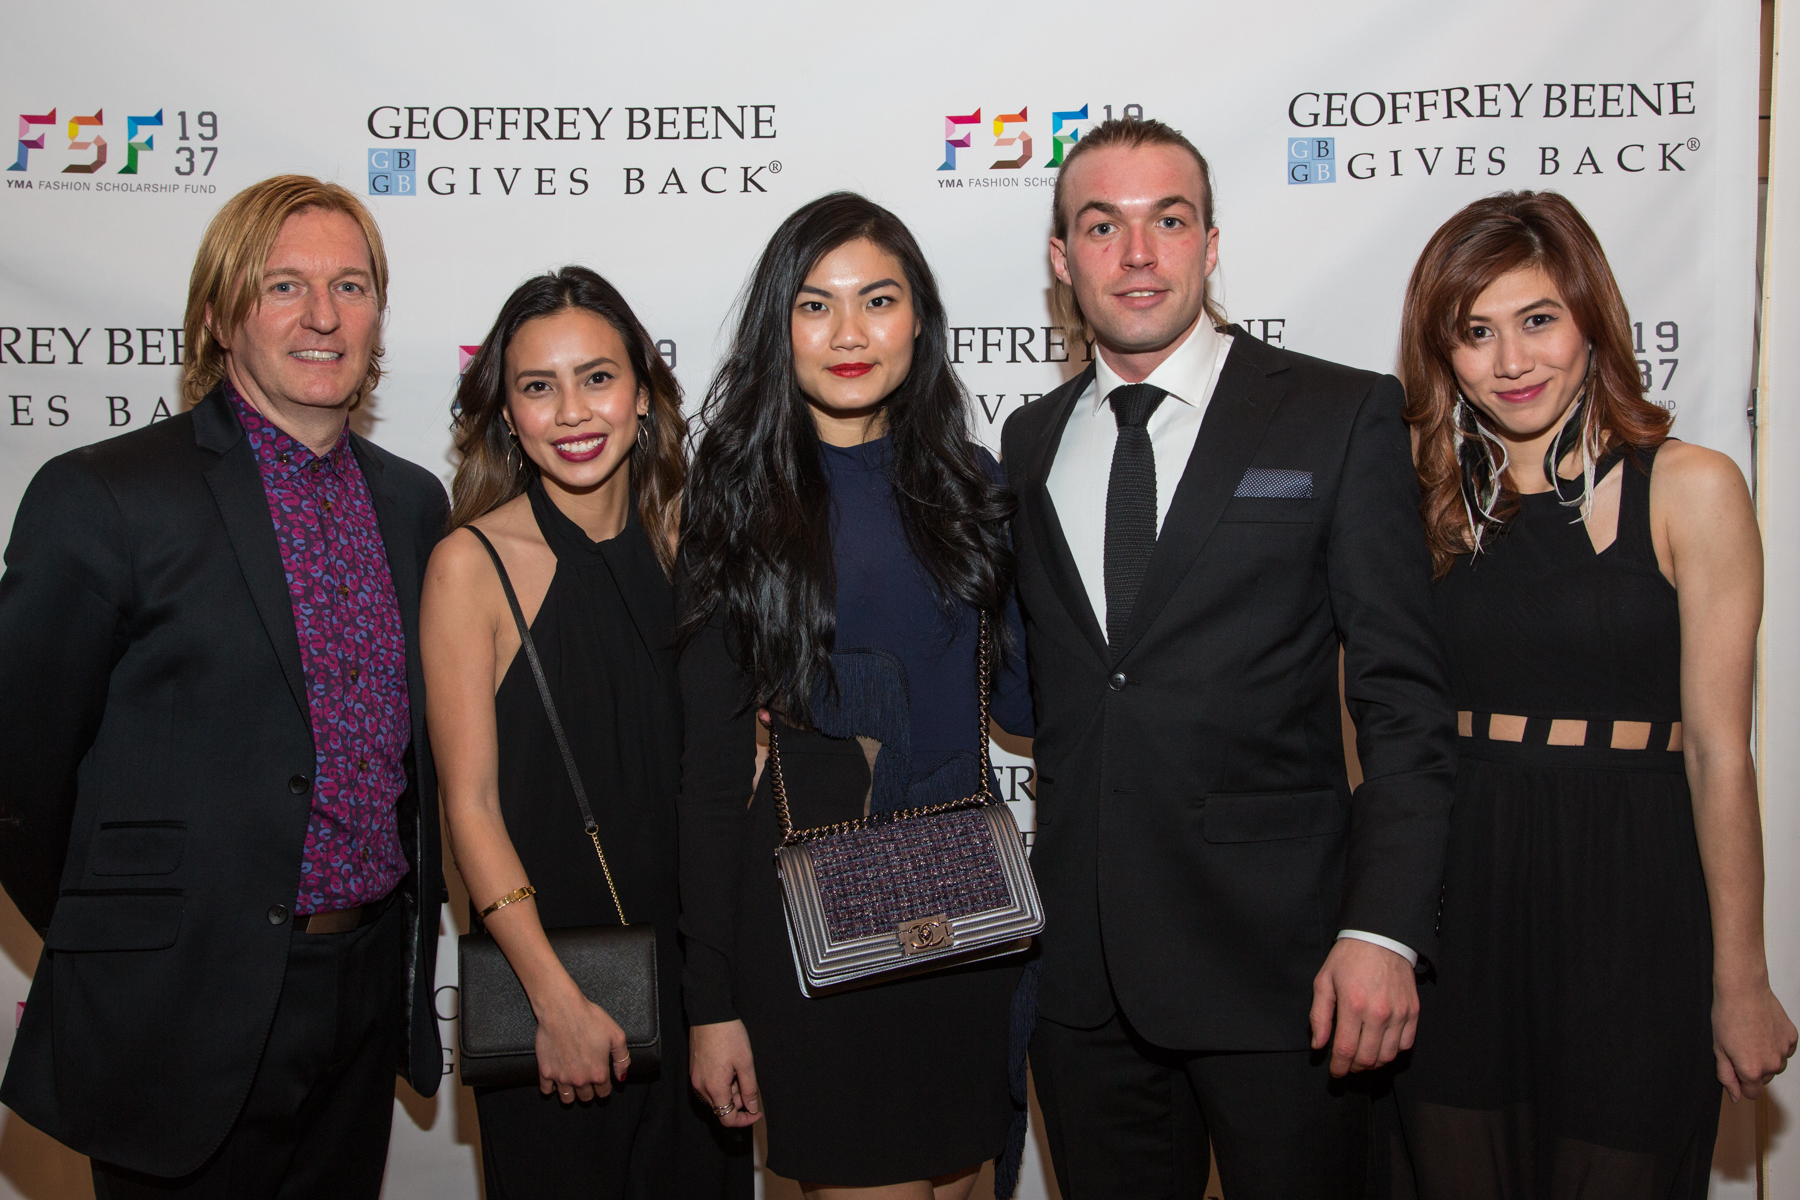 From left to right: Senior Director of Fashion Merchandising Keanan Duffty, Celina Enriquez, Michelle Hendrawan, Martin Evensen, and Busara Boussard. Photo courtesy of YMA-FSF.